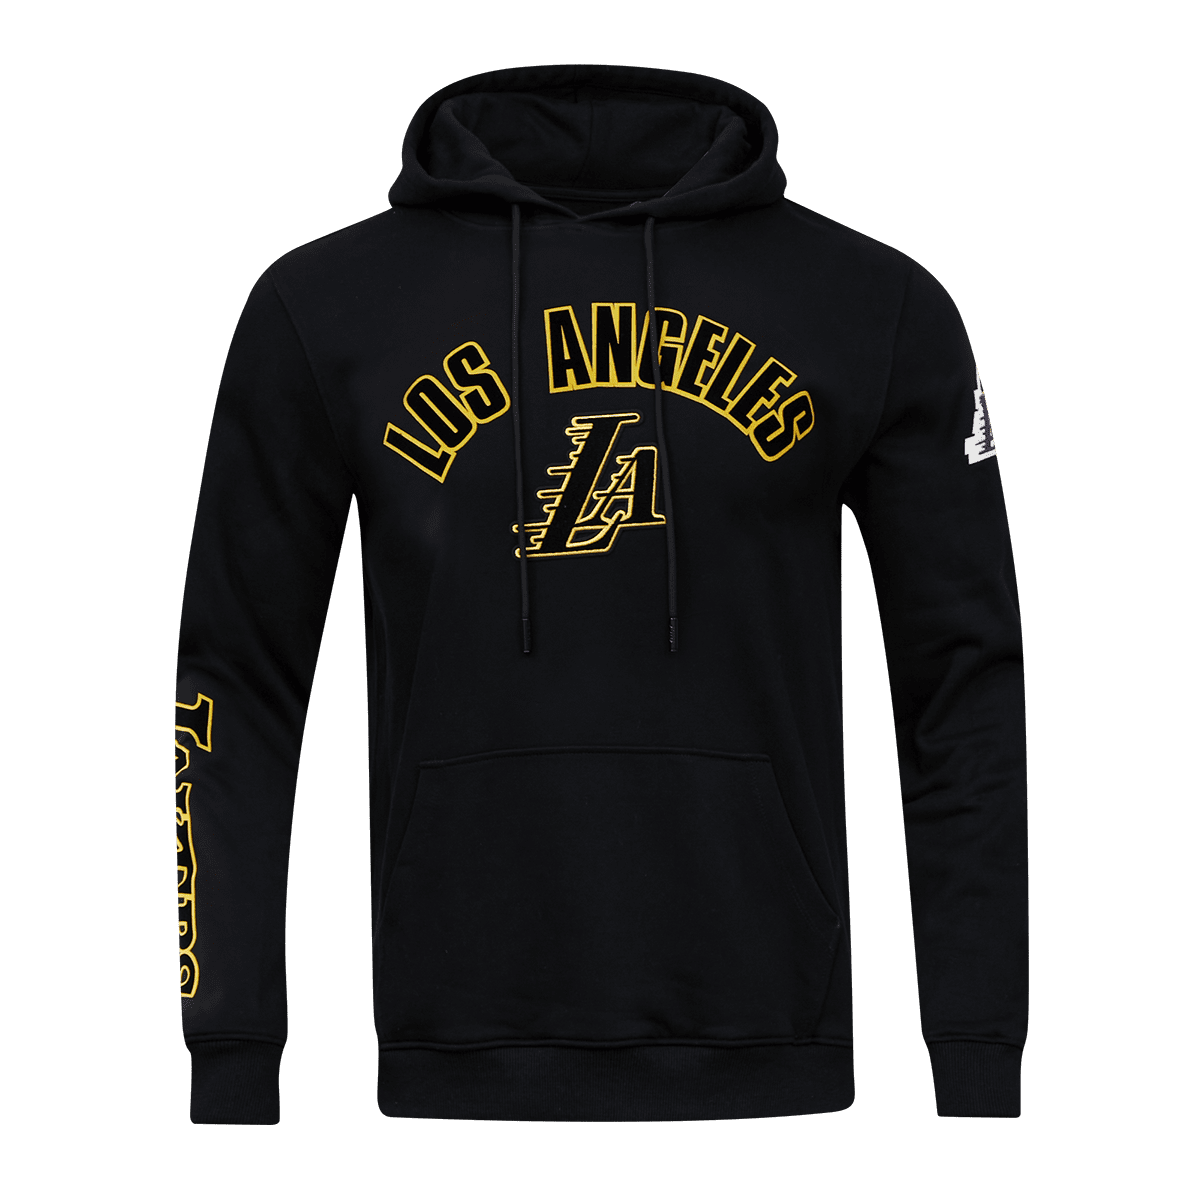 Los Angeles Lakers Pro Standard Team Pullover Hoodie - Camo